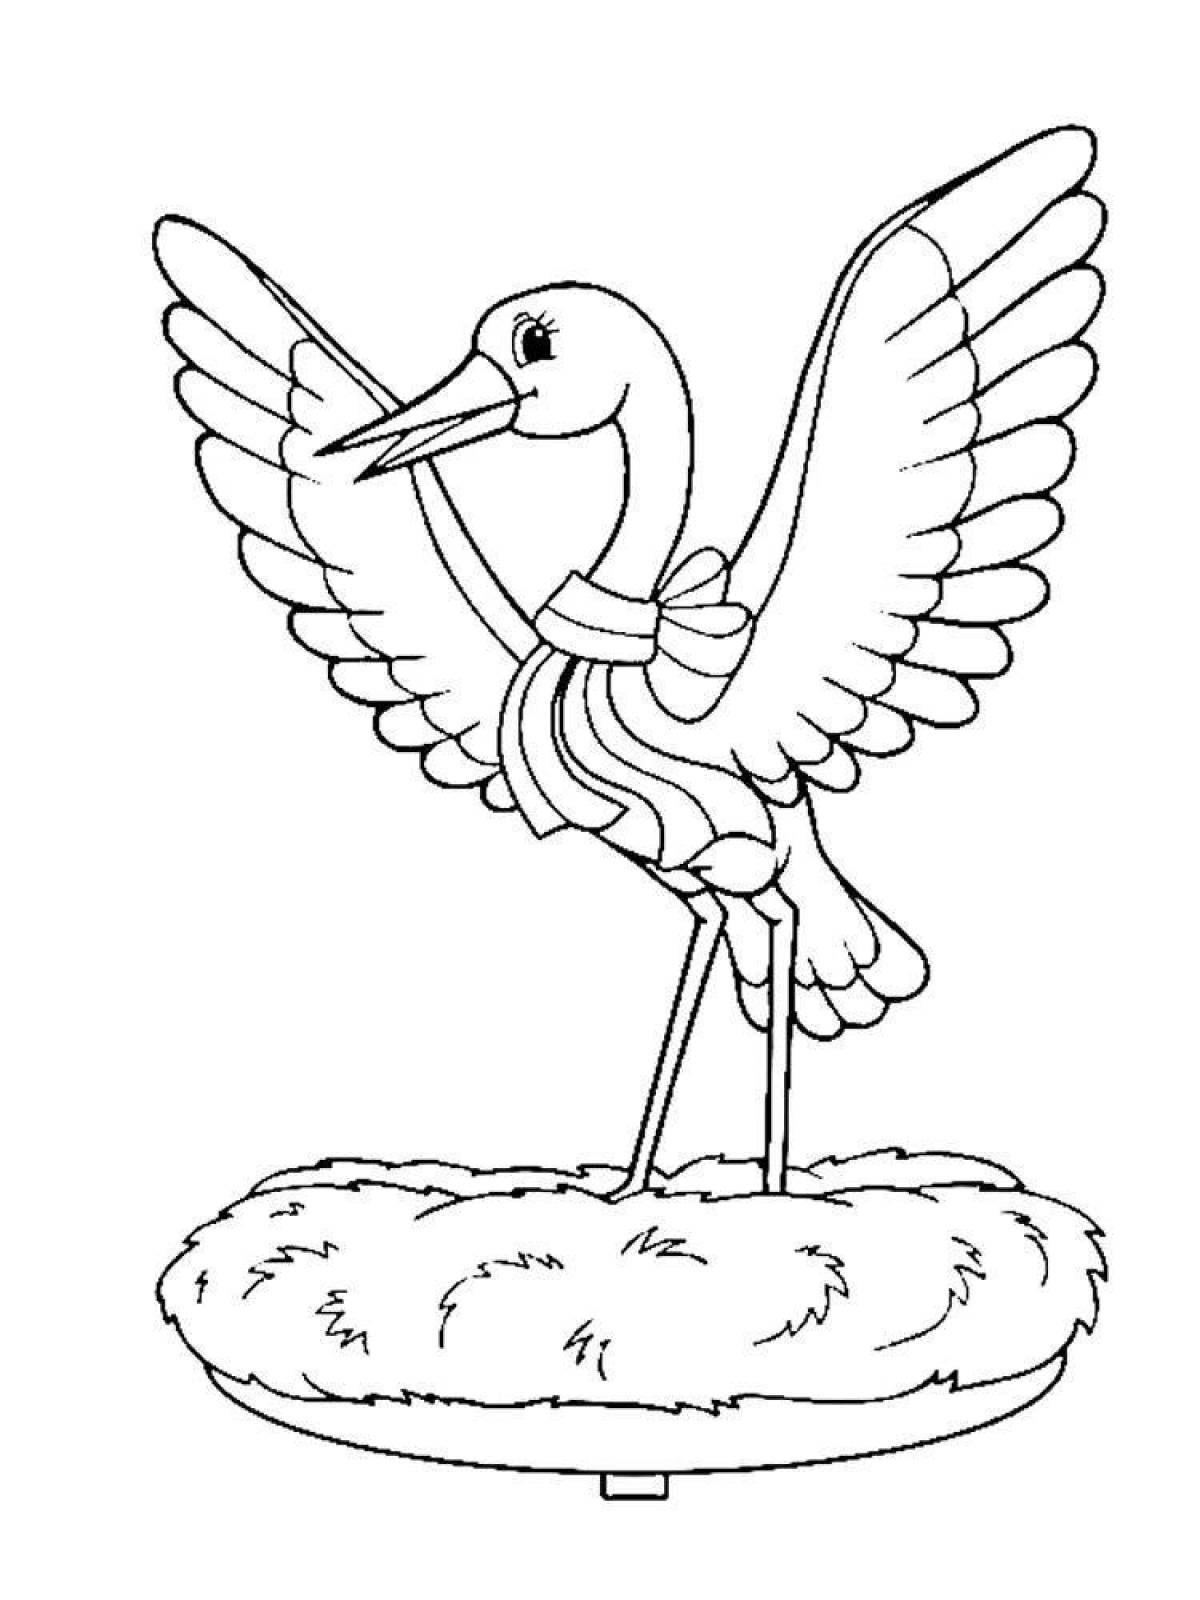 Amazing coloring book stork for kids